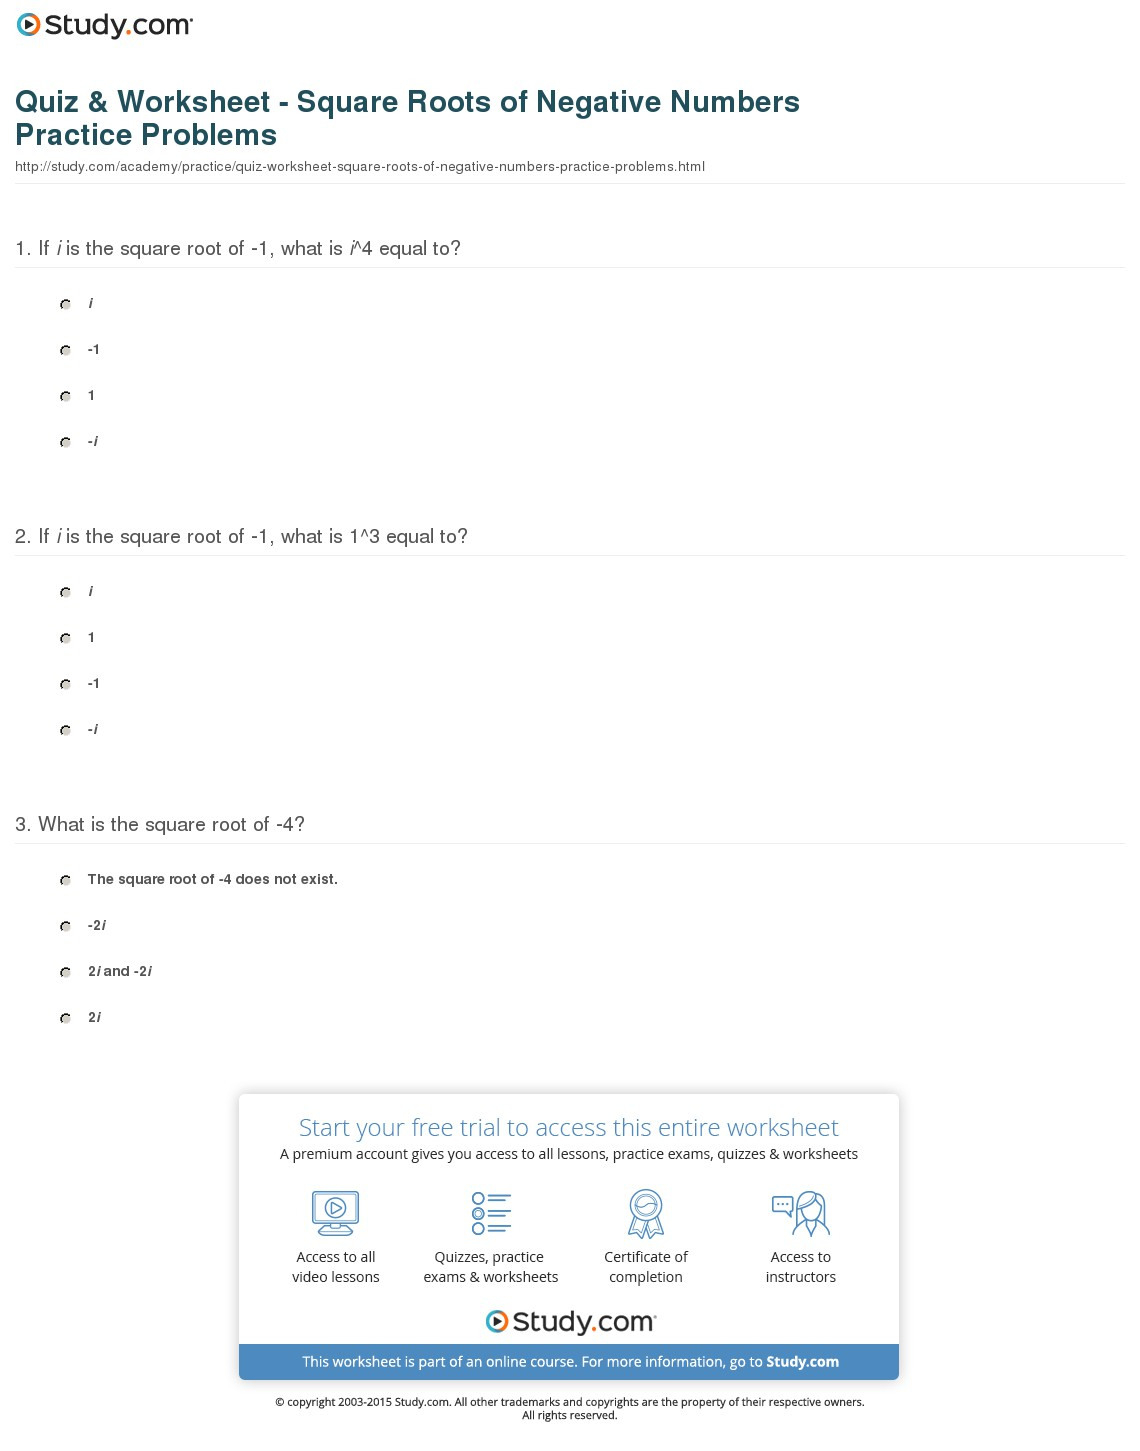 square-roots-of-negative-numbers-worksheet-db-excel